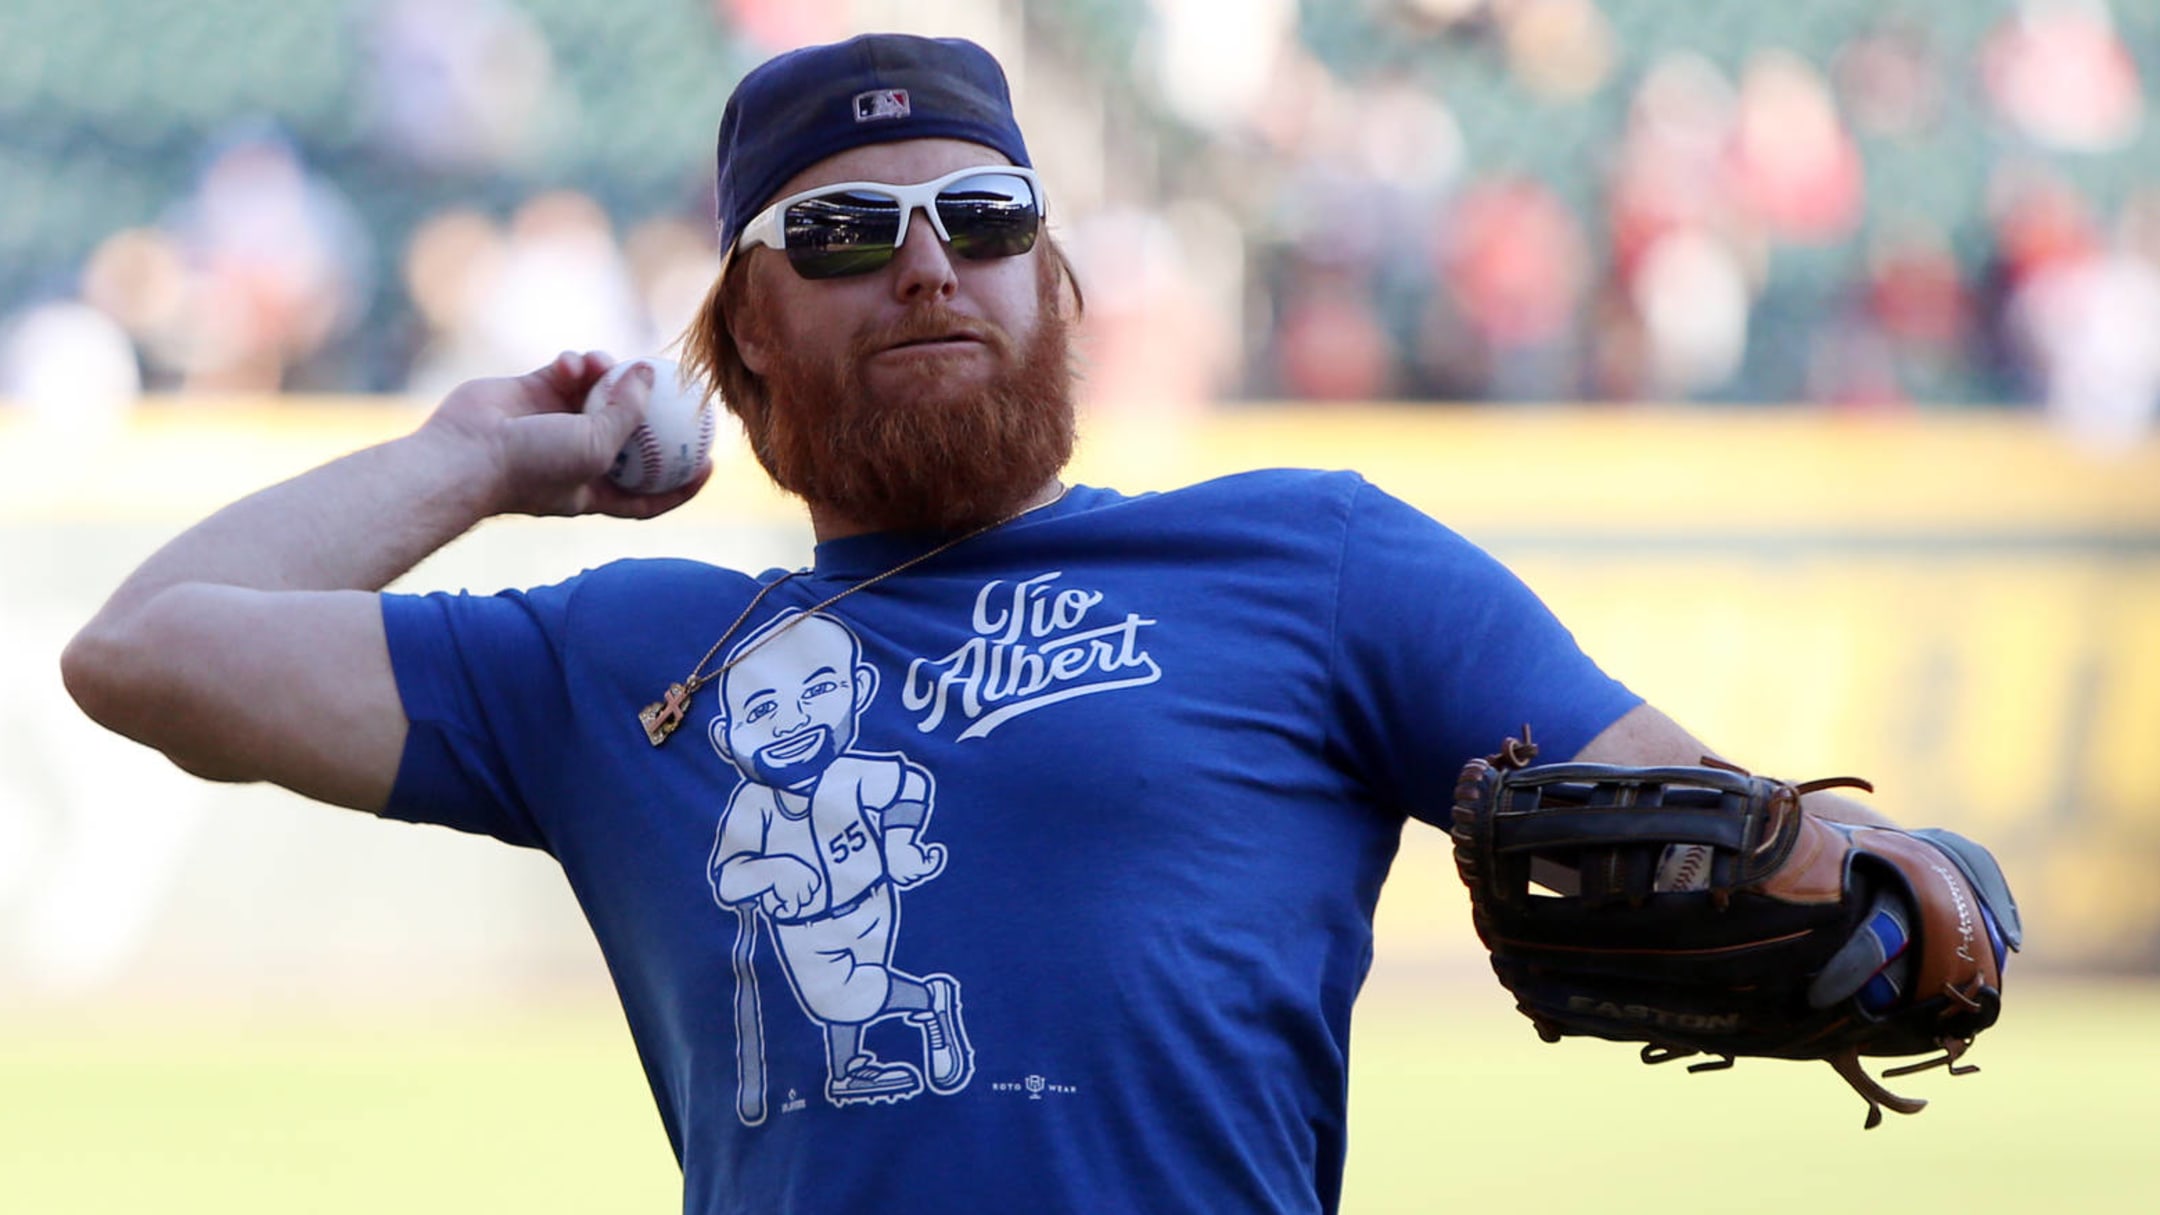 Dodgers' Justin Turner out for Game 2 of NLCS with neck injury